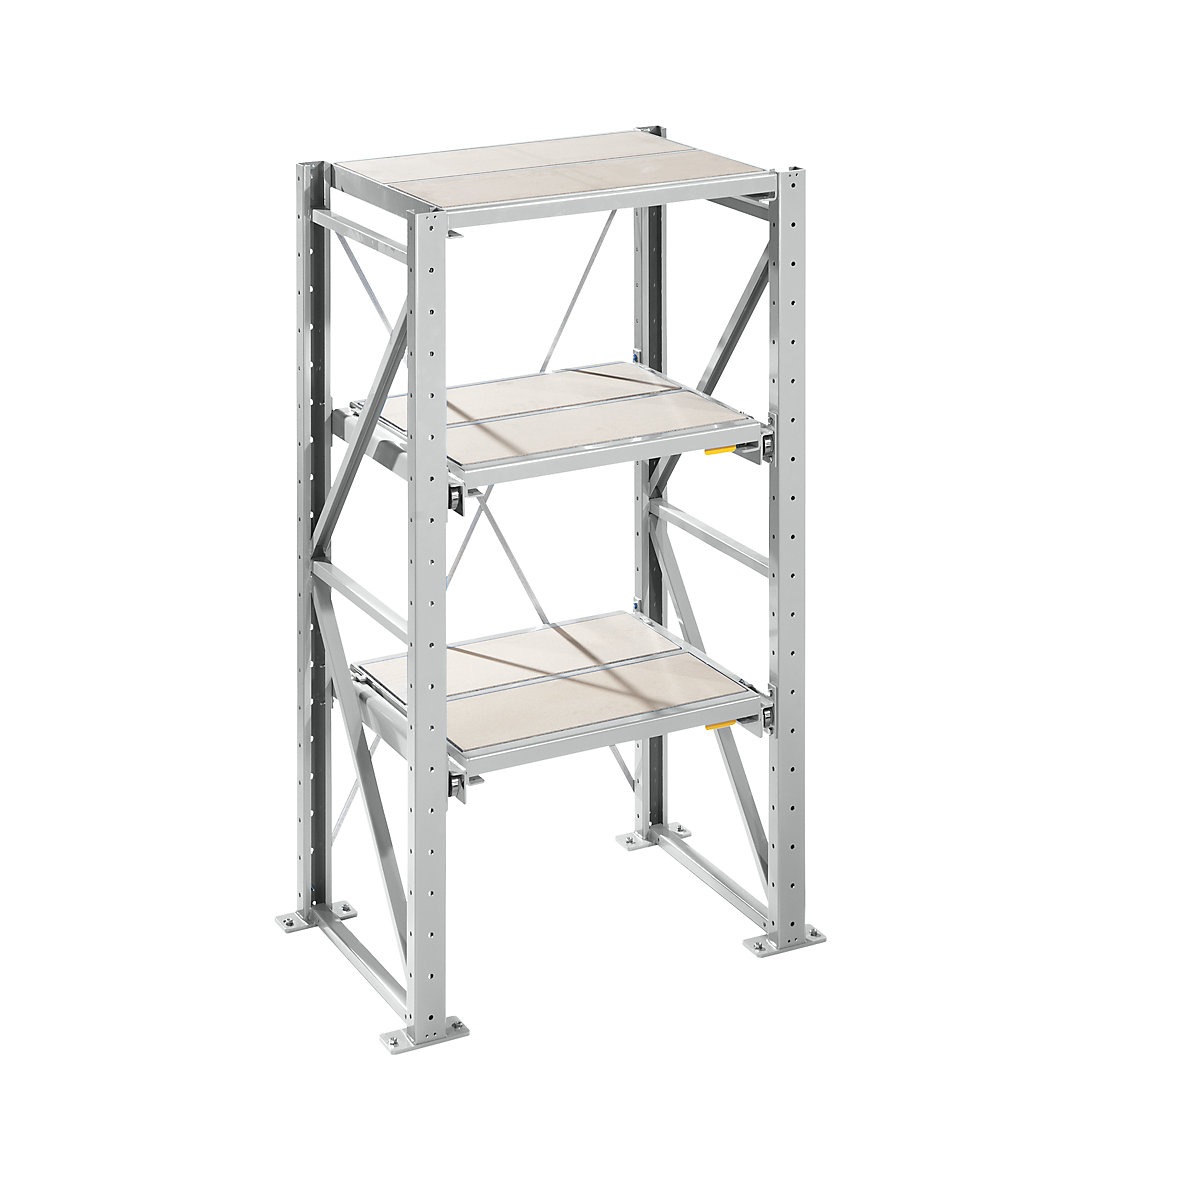 Heavy duty pull-out shelving unit – LISTA